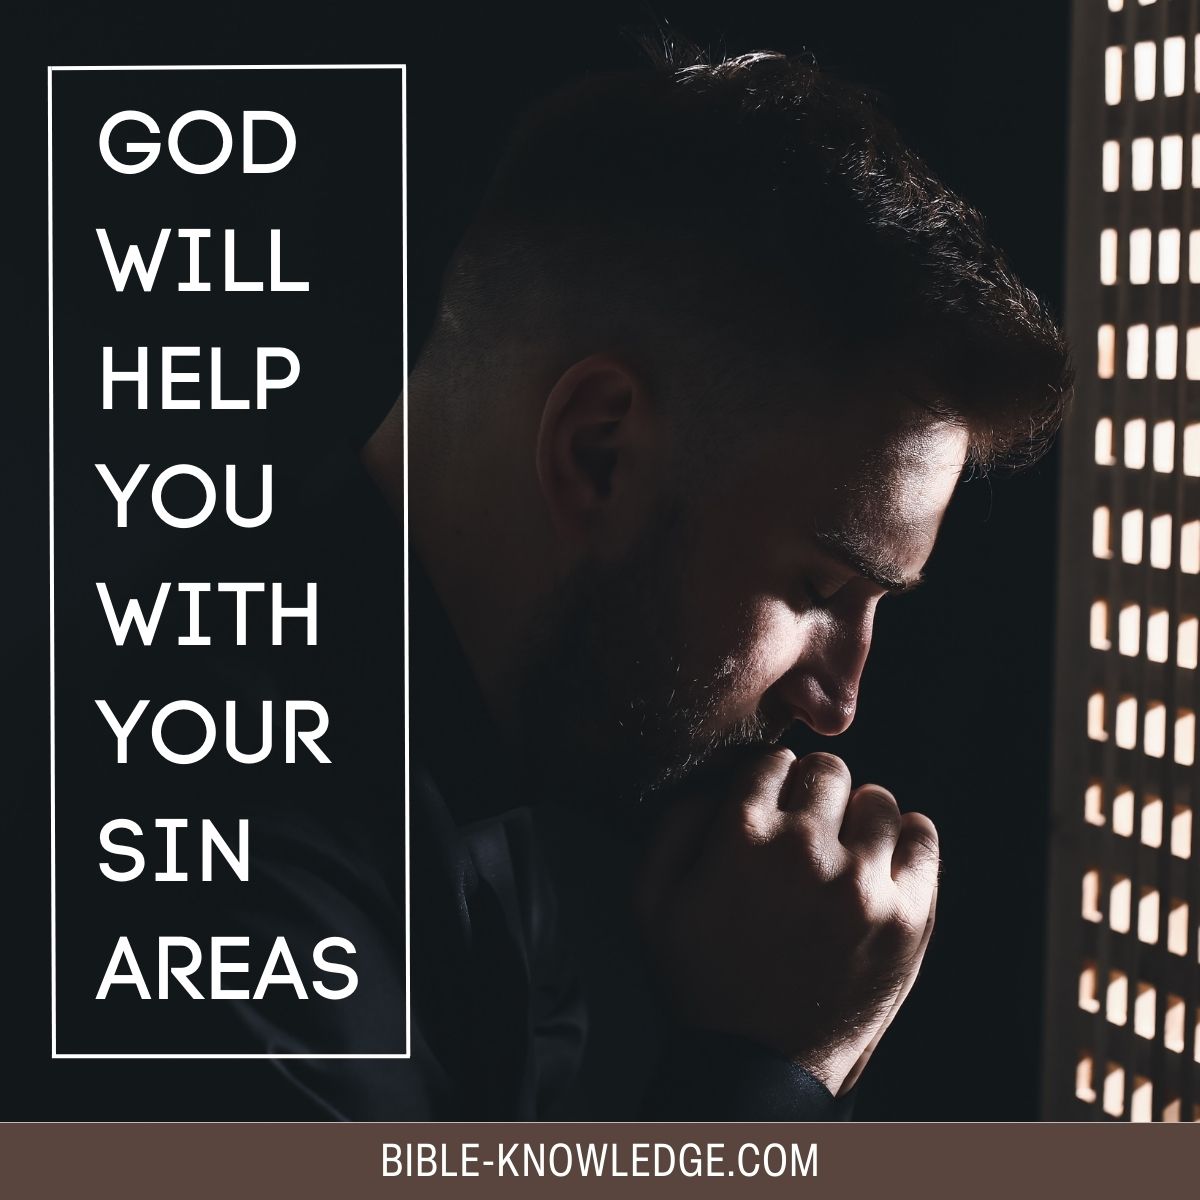 God Will Help You With Your Sin Areas